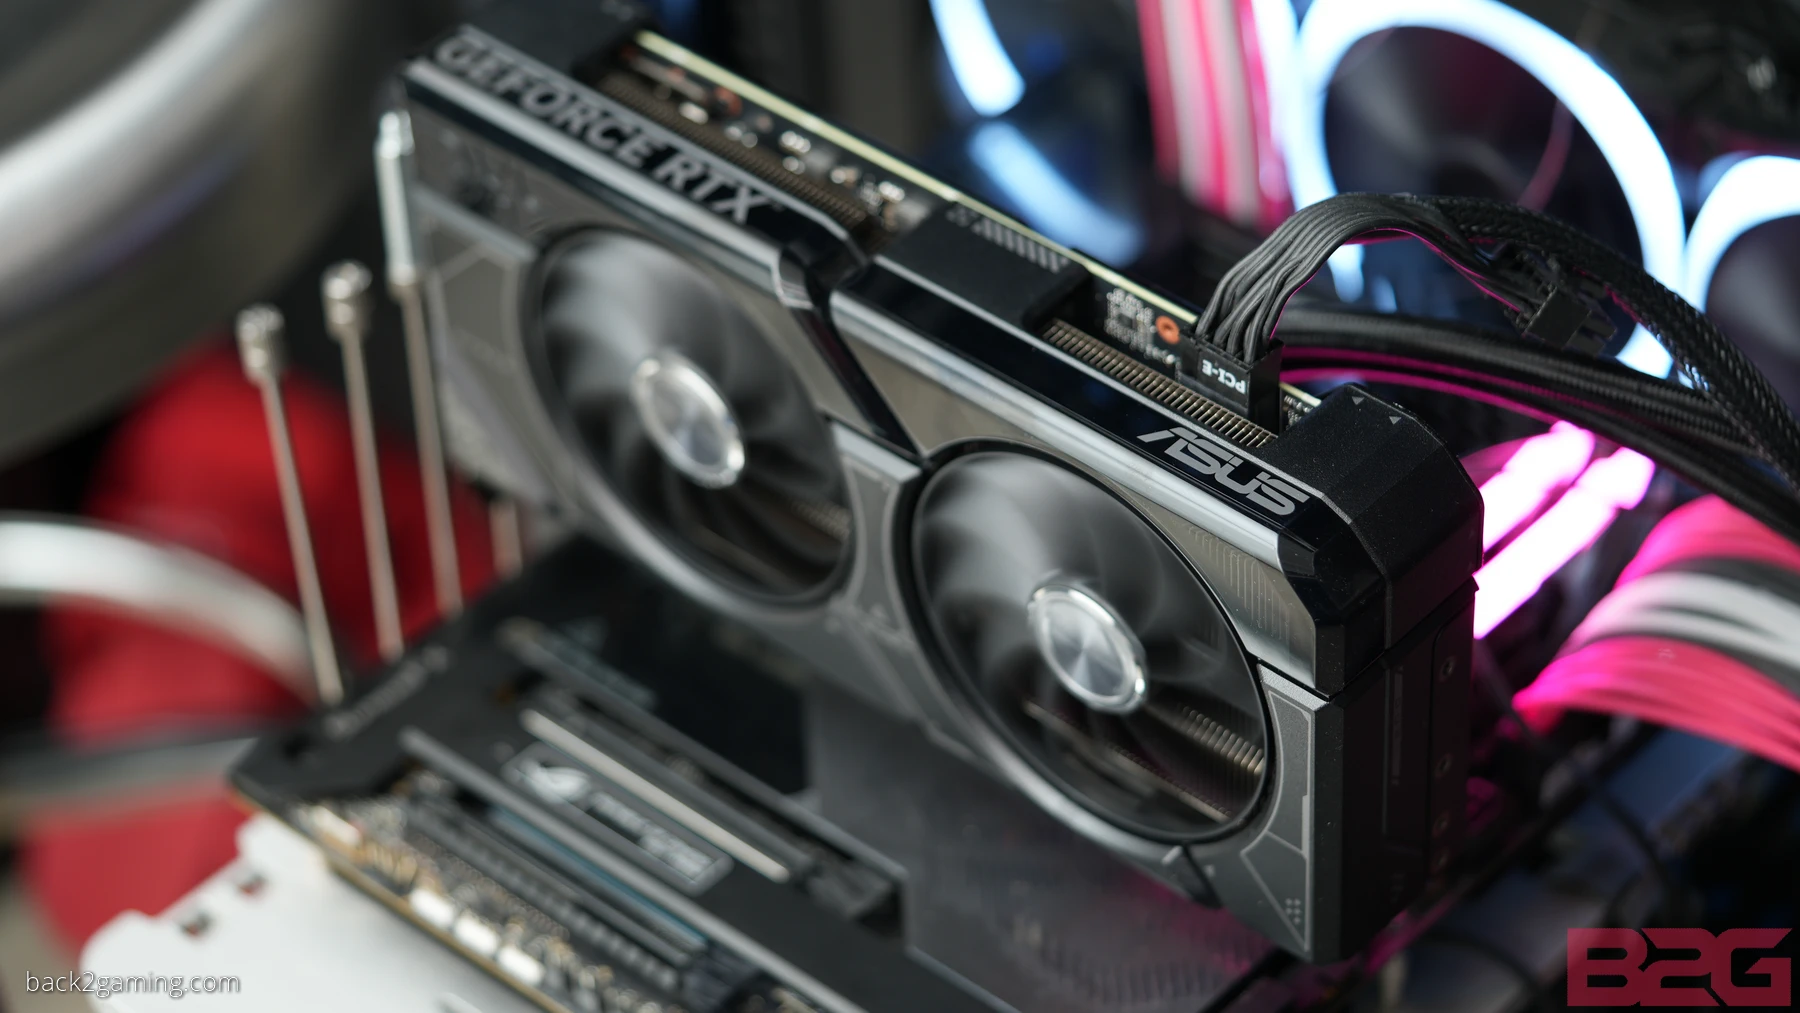 ASUS RTX 4070 DUAL 12GB Graphics Card Review - ASUS RTX 4070 DUAL